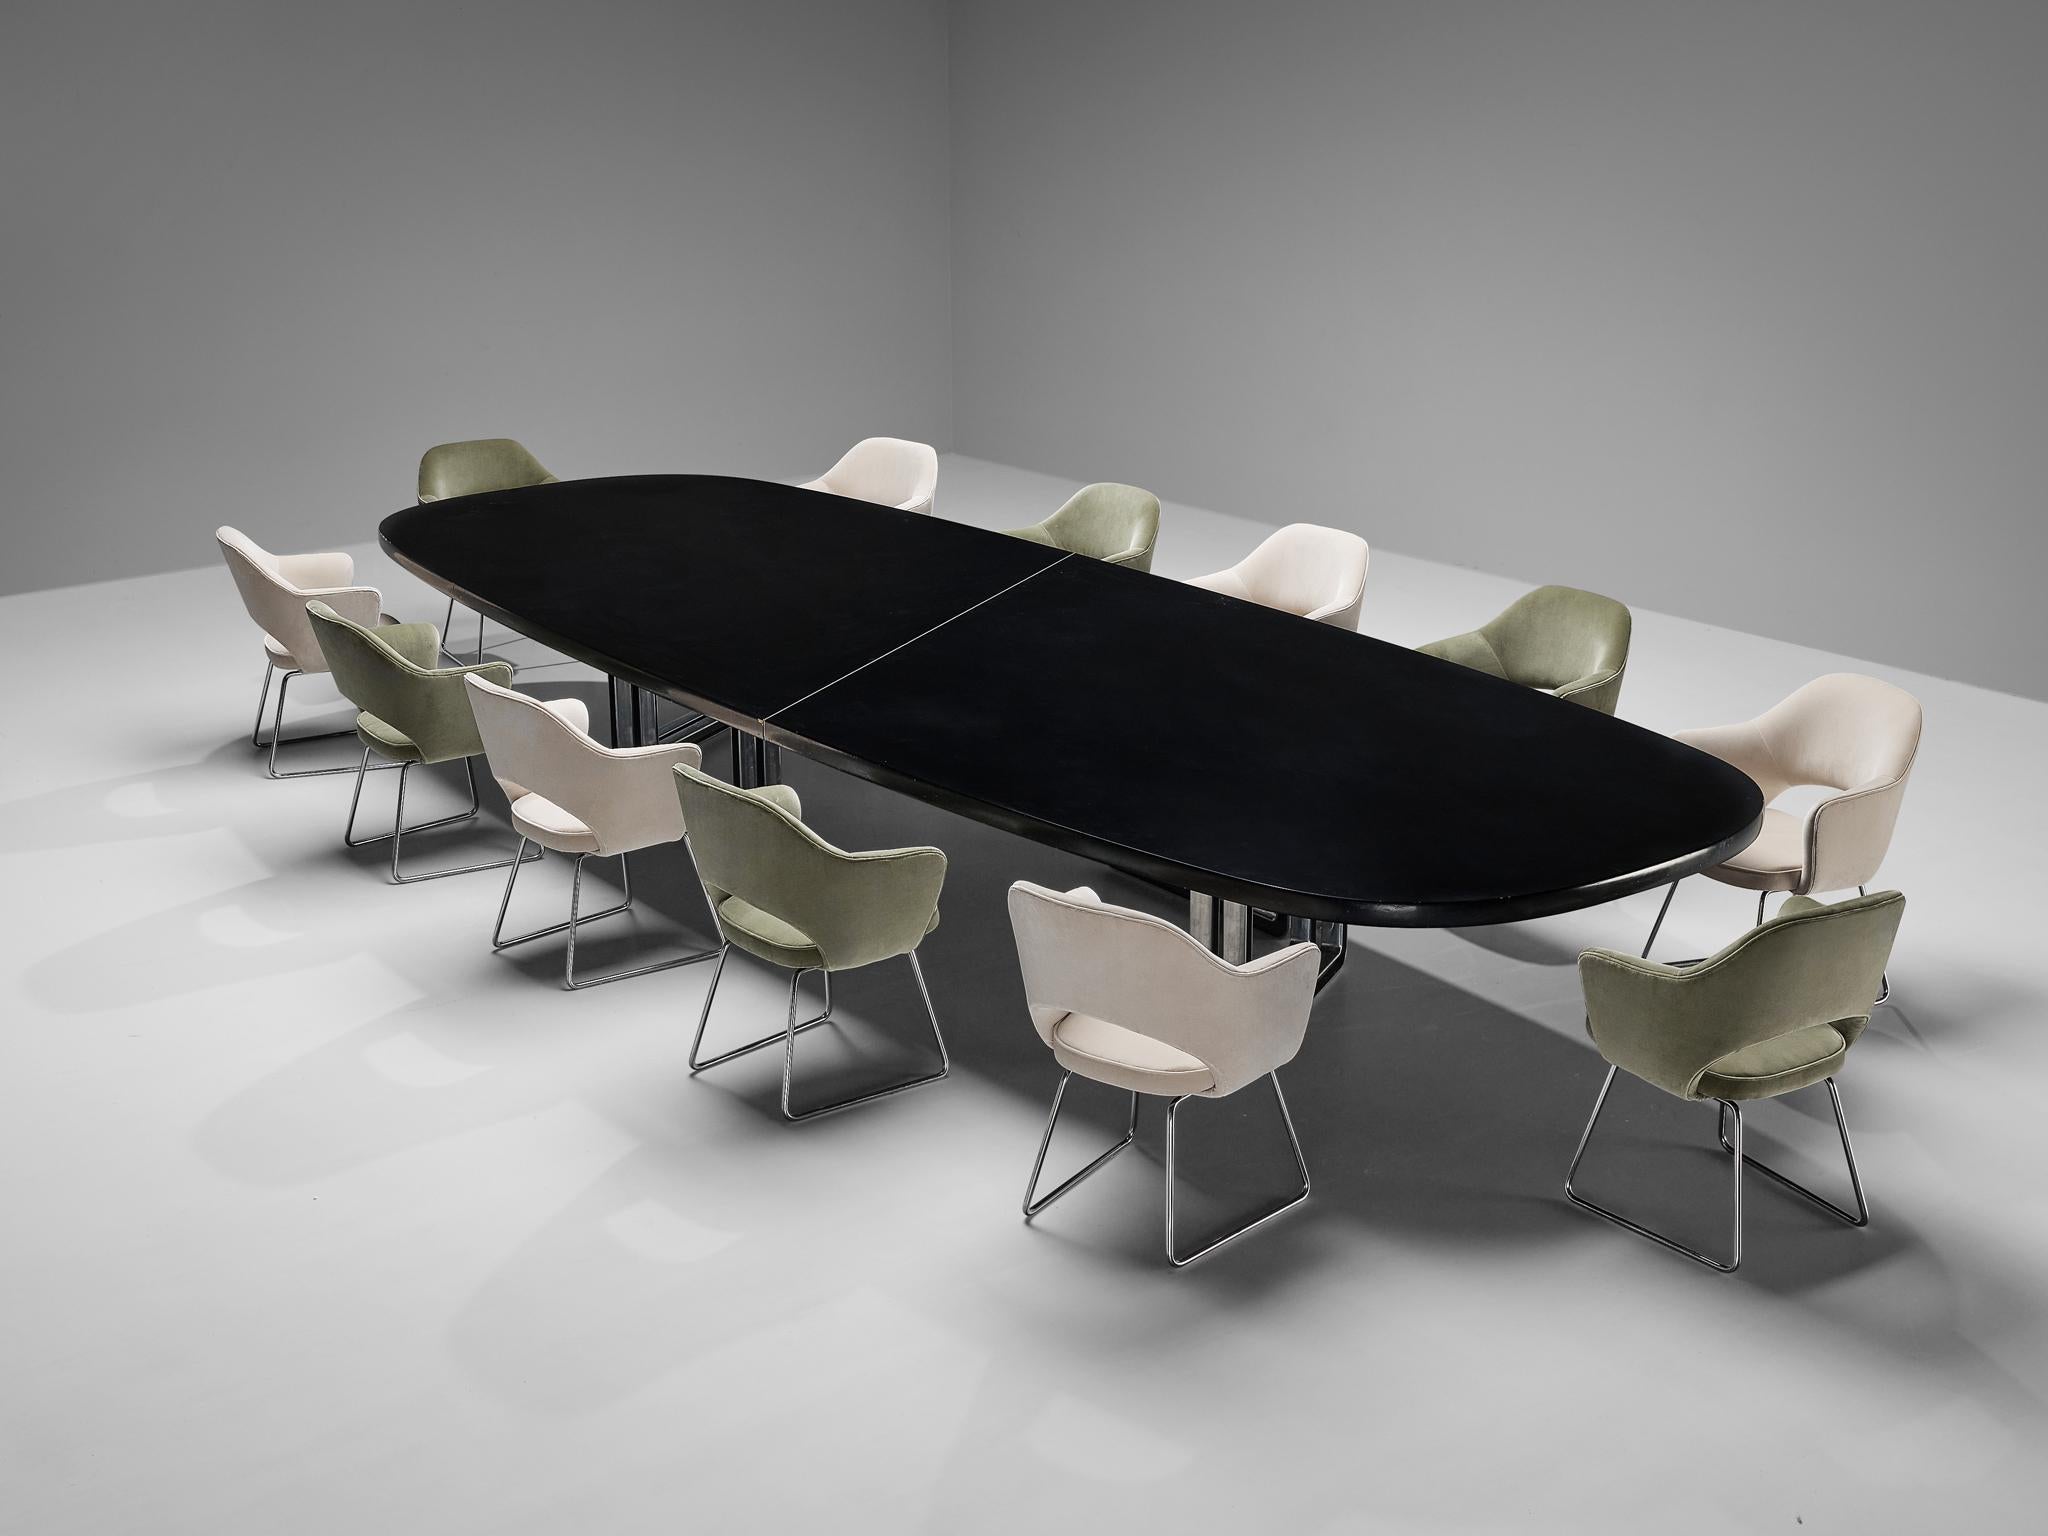 Centro Progetti Tecno, dining or conference table model 'T335', lacquered wood, aluminum, Italy, 1975-1978

Large dining or conferenced table with a black lacquered wooden top that has an incredibly soft texture. The table is composed of two parts